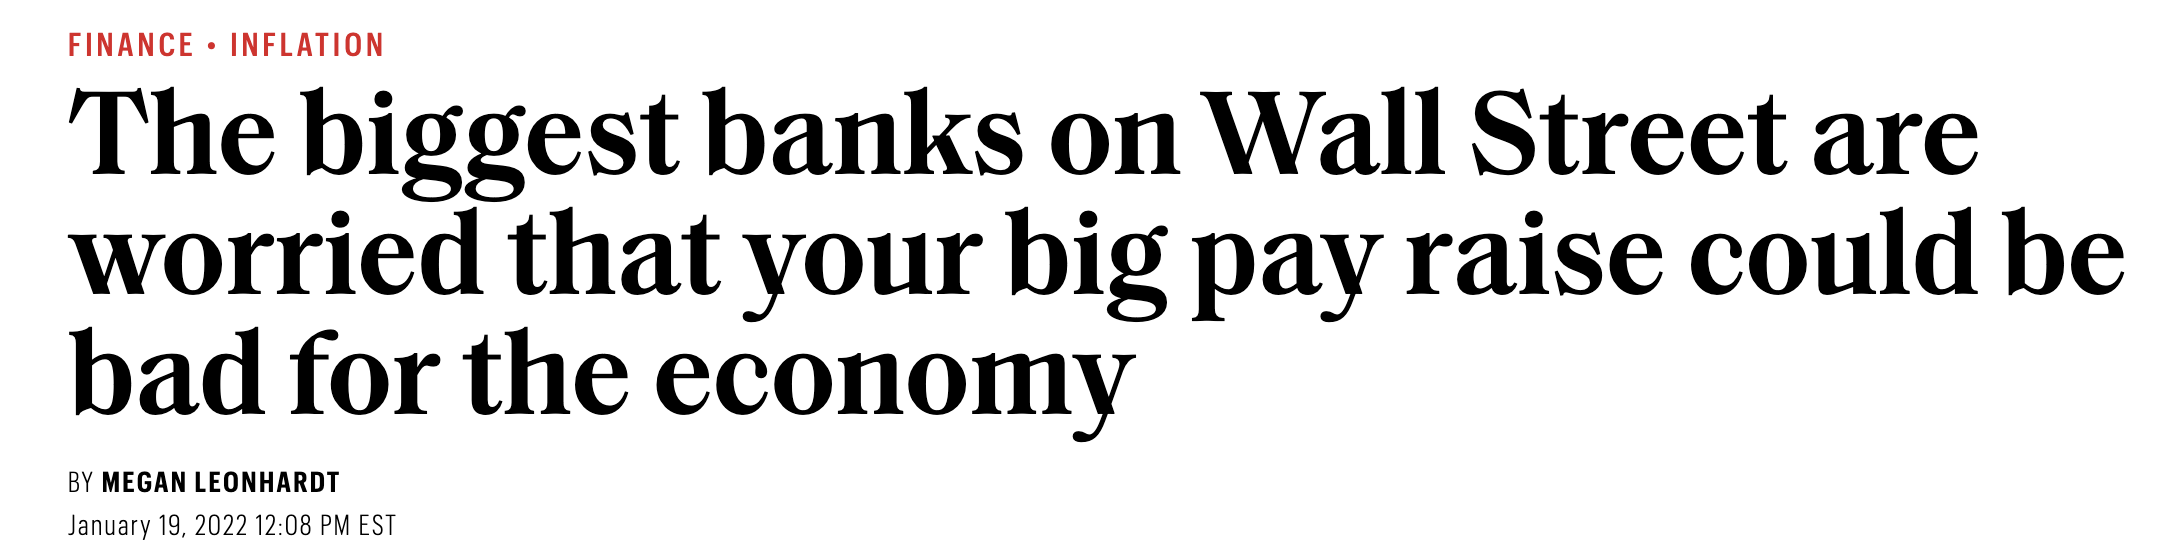 &quot;The biggest banks on Wall Street are worried that your big pay raise could be bad for the economy&quot;